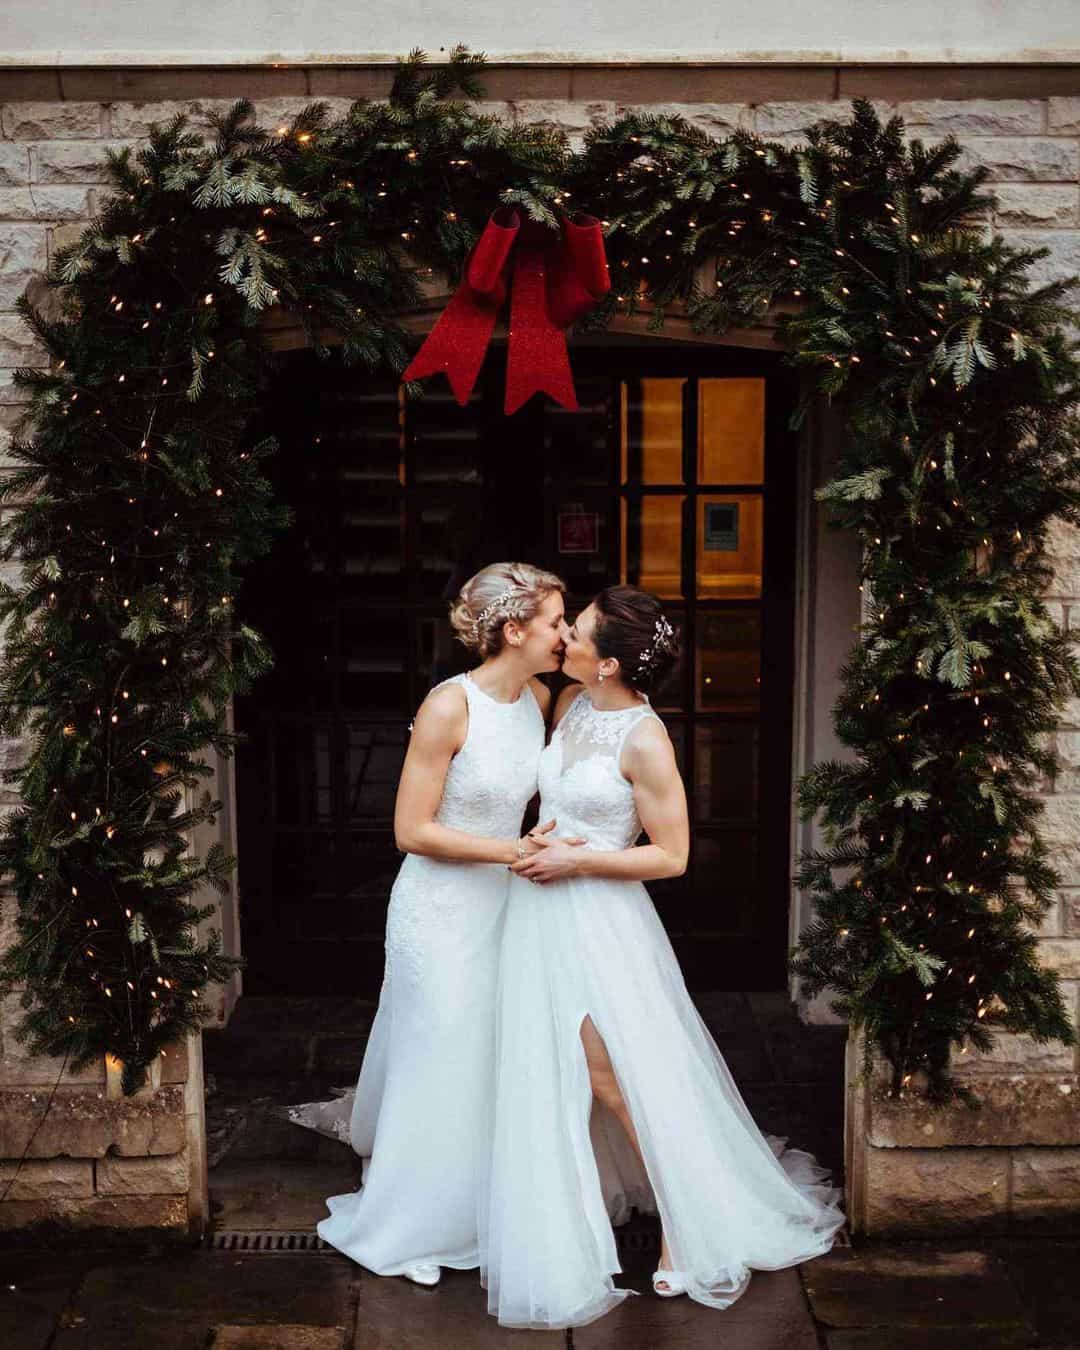 couple outside wedding venue with holiday decor